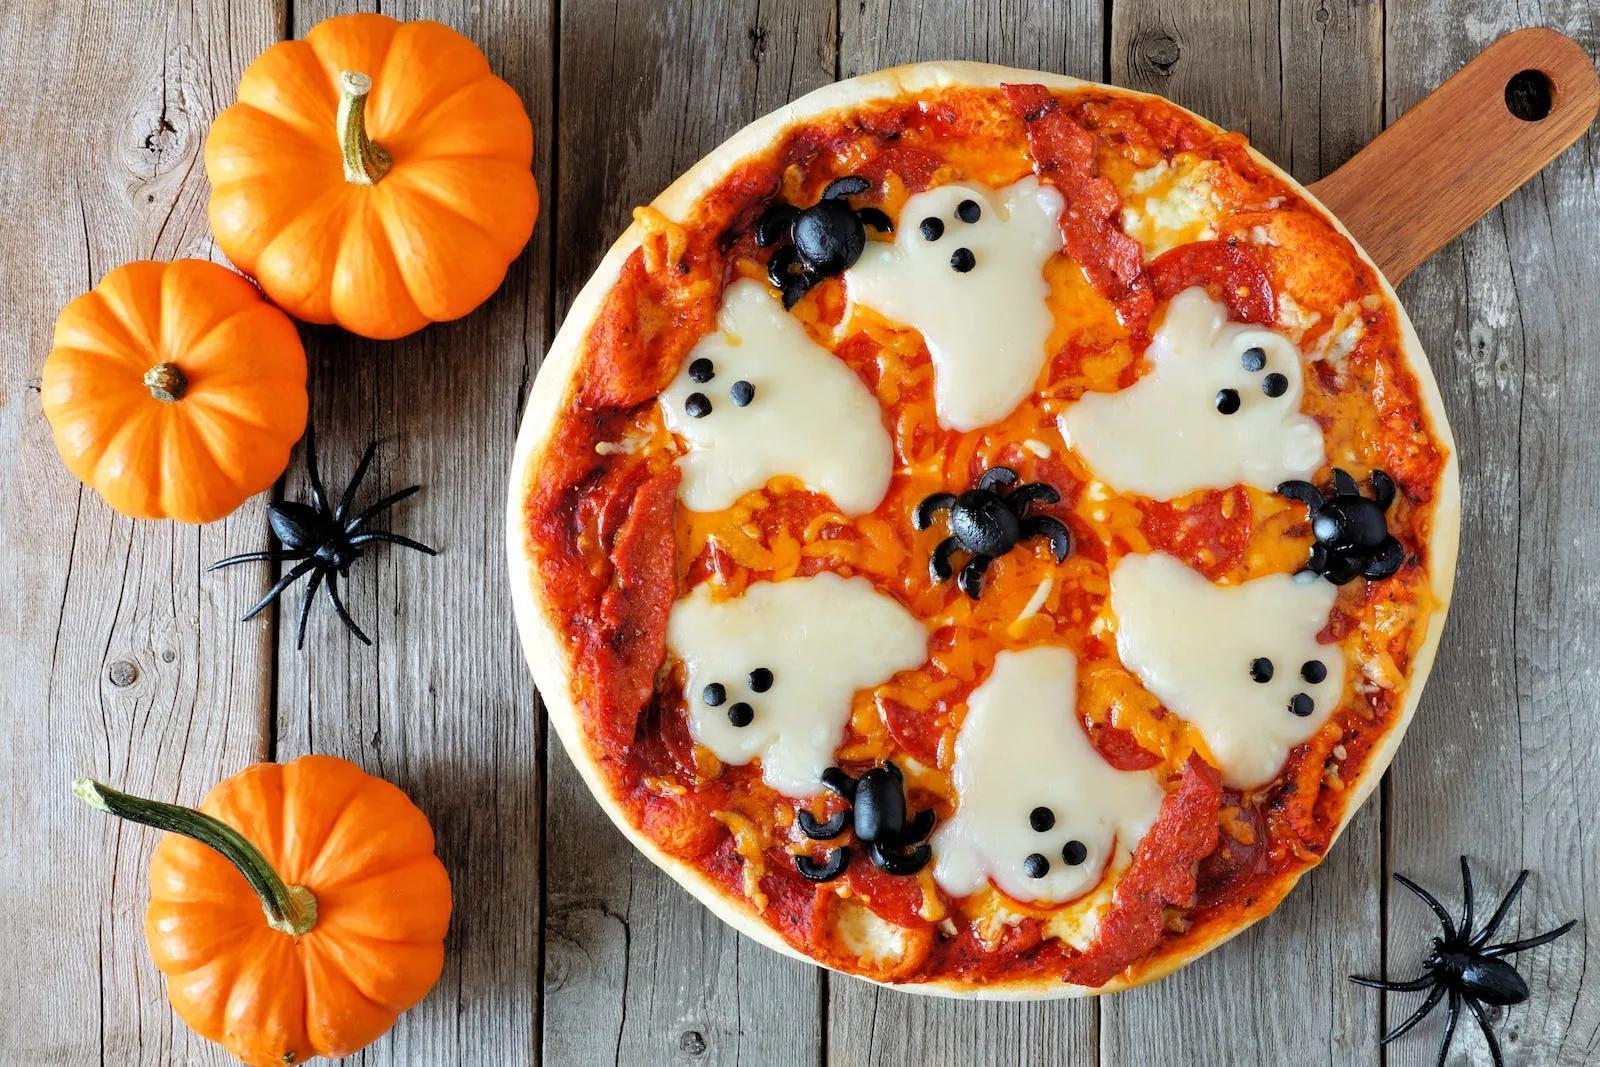 11 Totally Spooky Halloween Food Ideas To Try - Hand Luggage Only ...